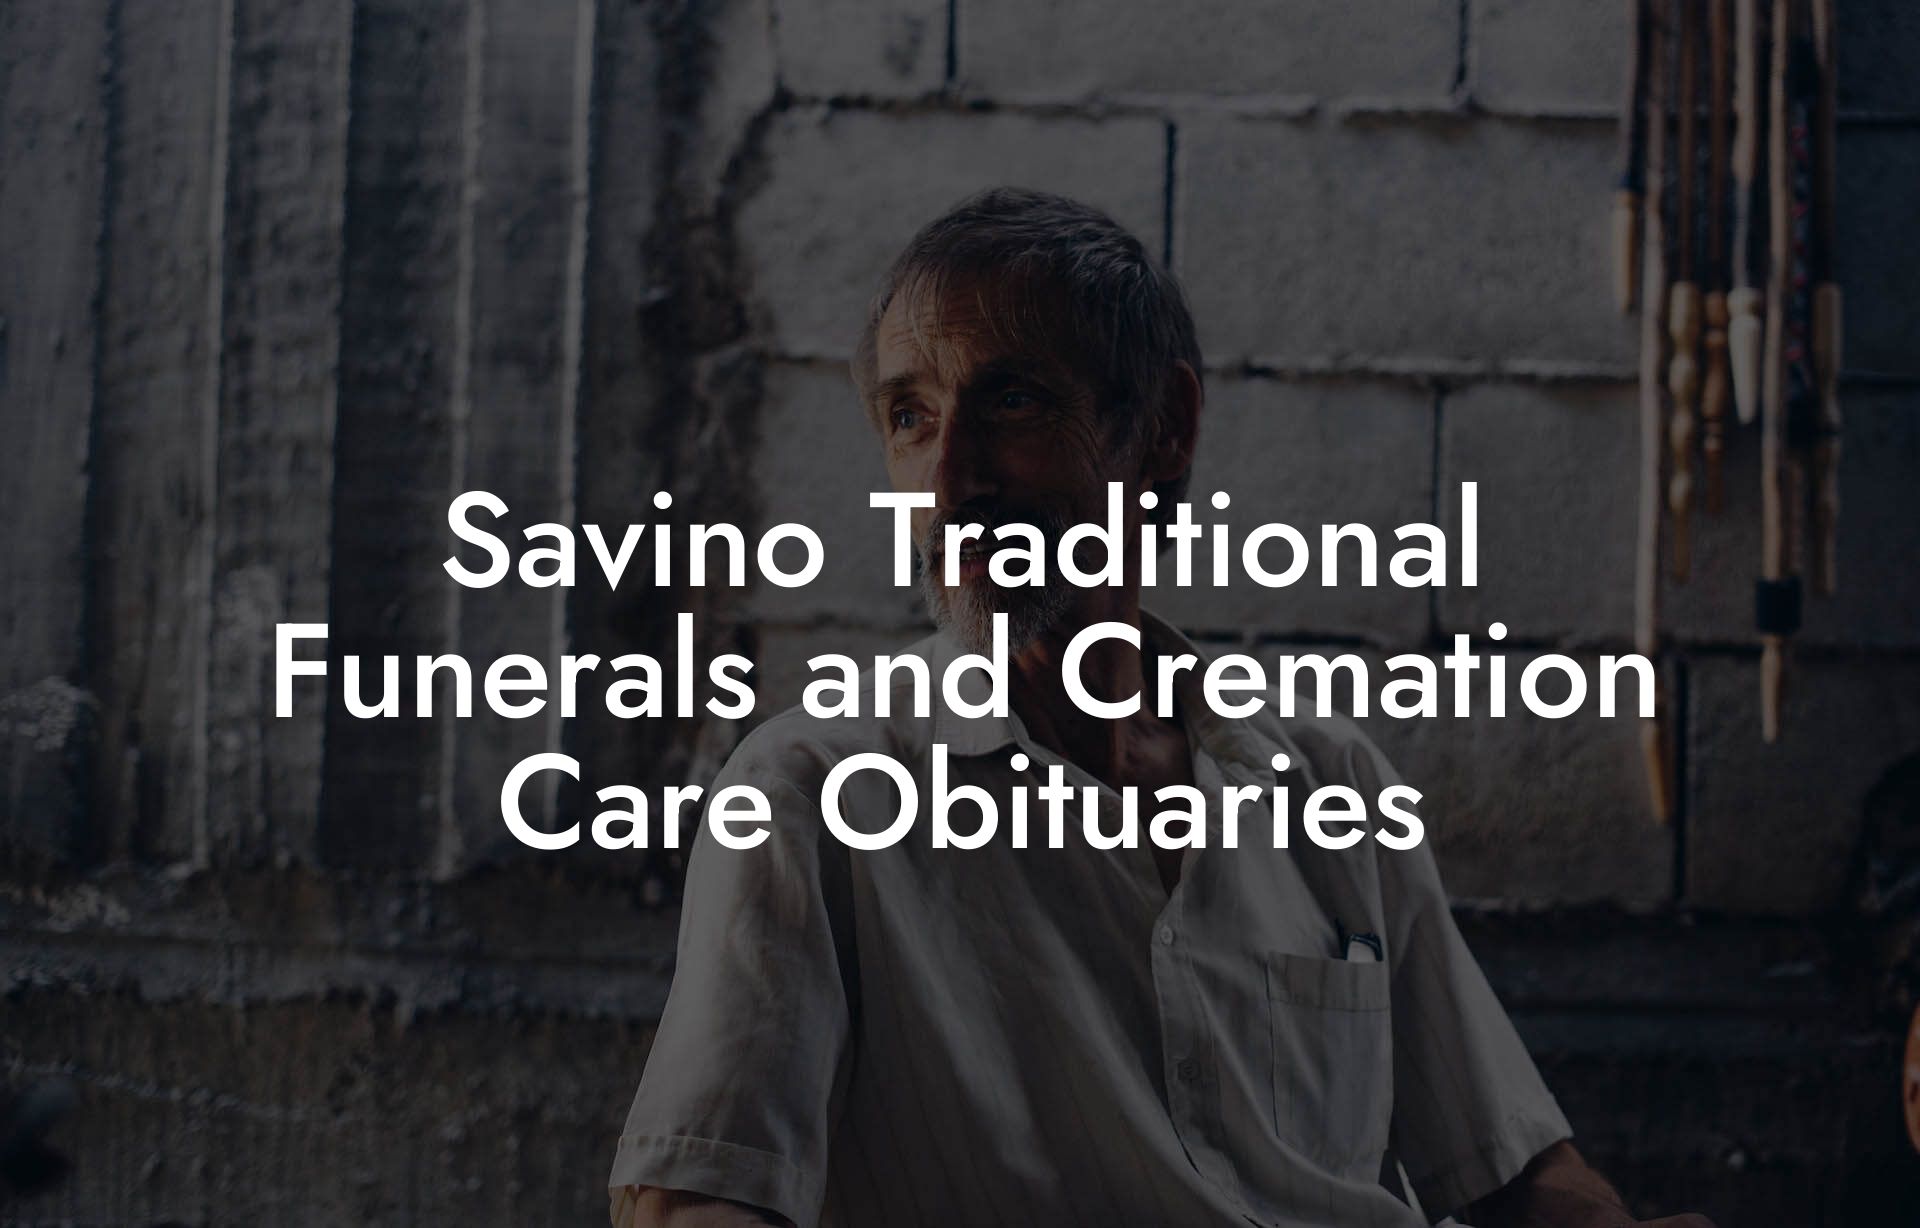 Savino Traditional Funerals and Cremation Care Obituaries